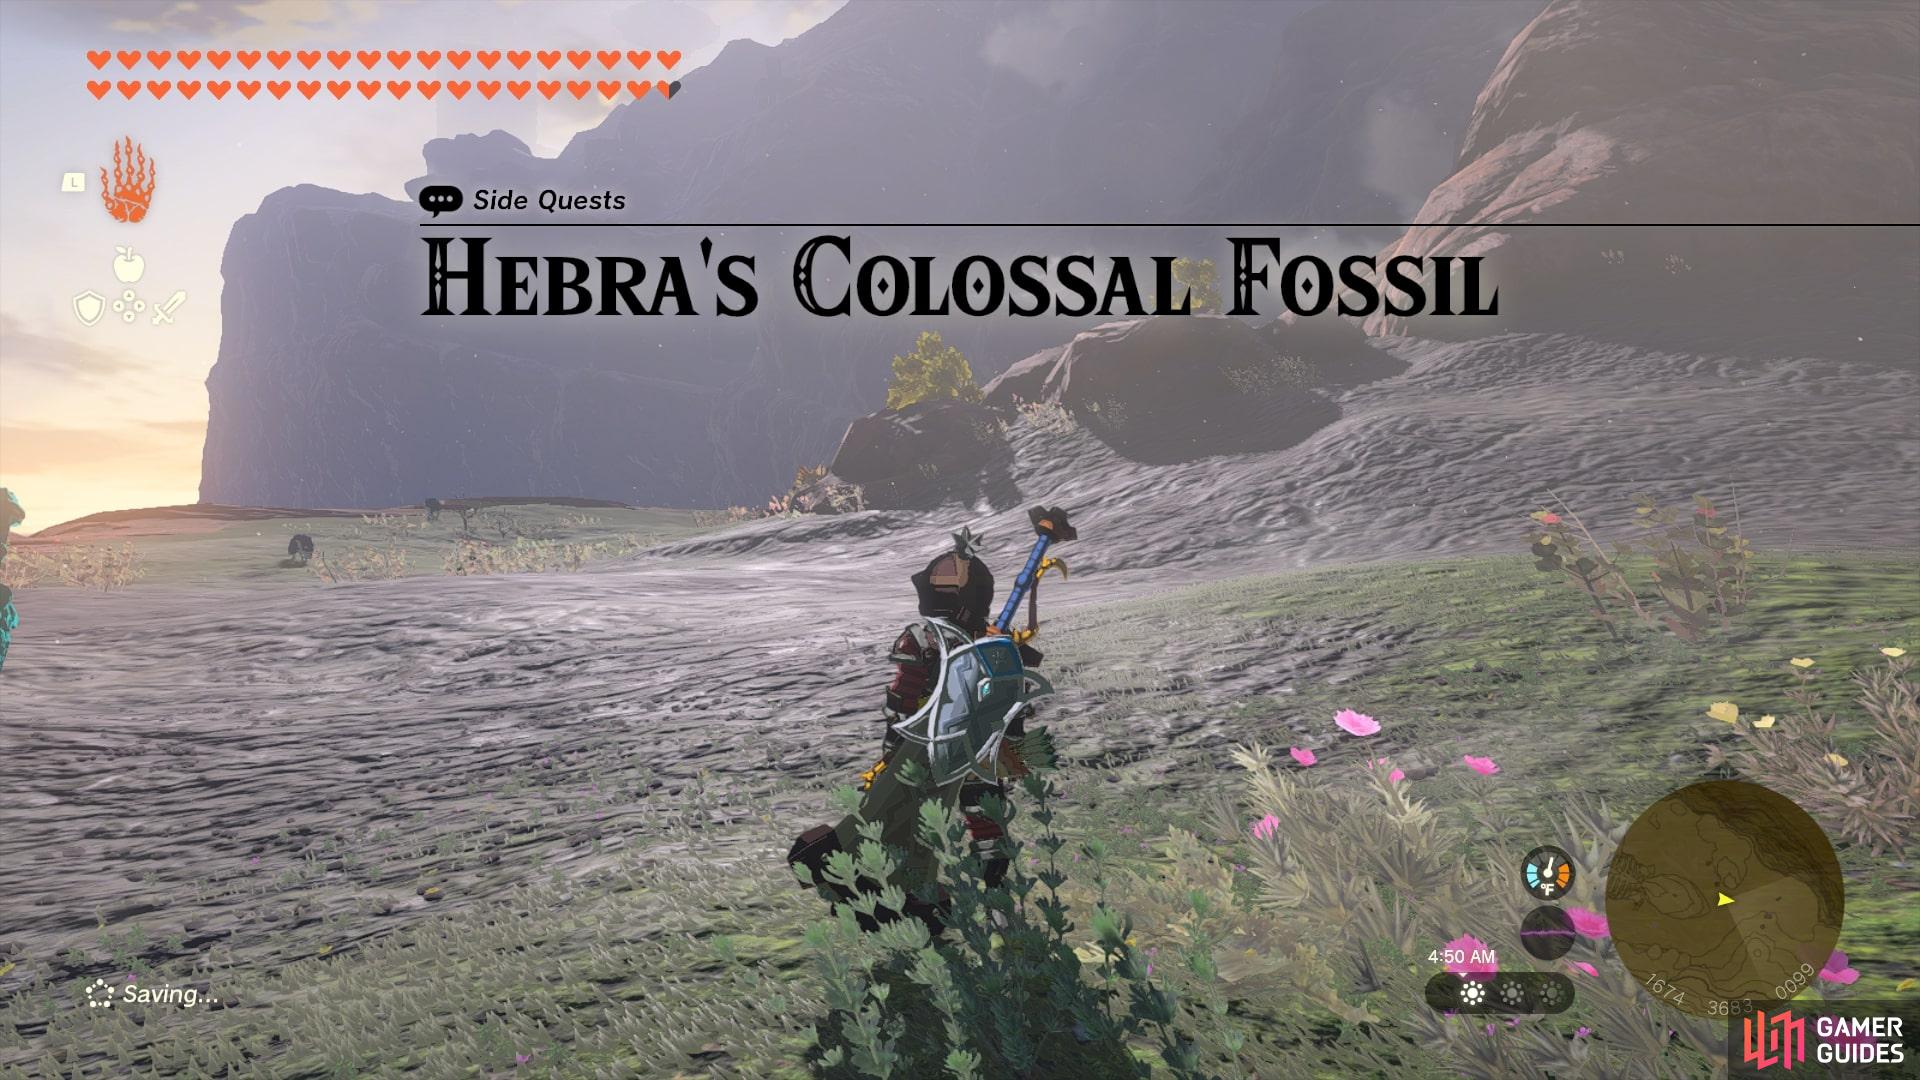 Once you finish Eldin’s Colossal Fossil, Hebra’s Colossal Fossil will begin.